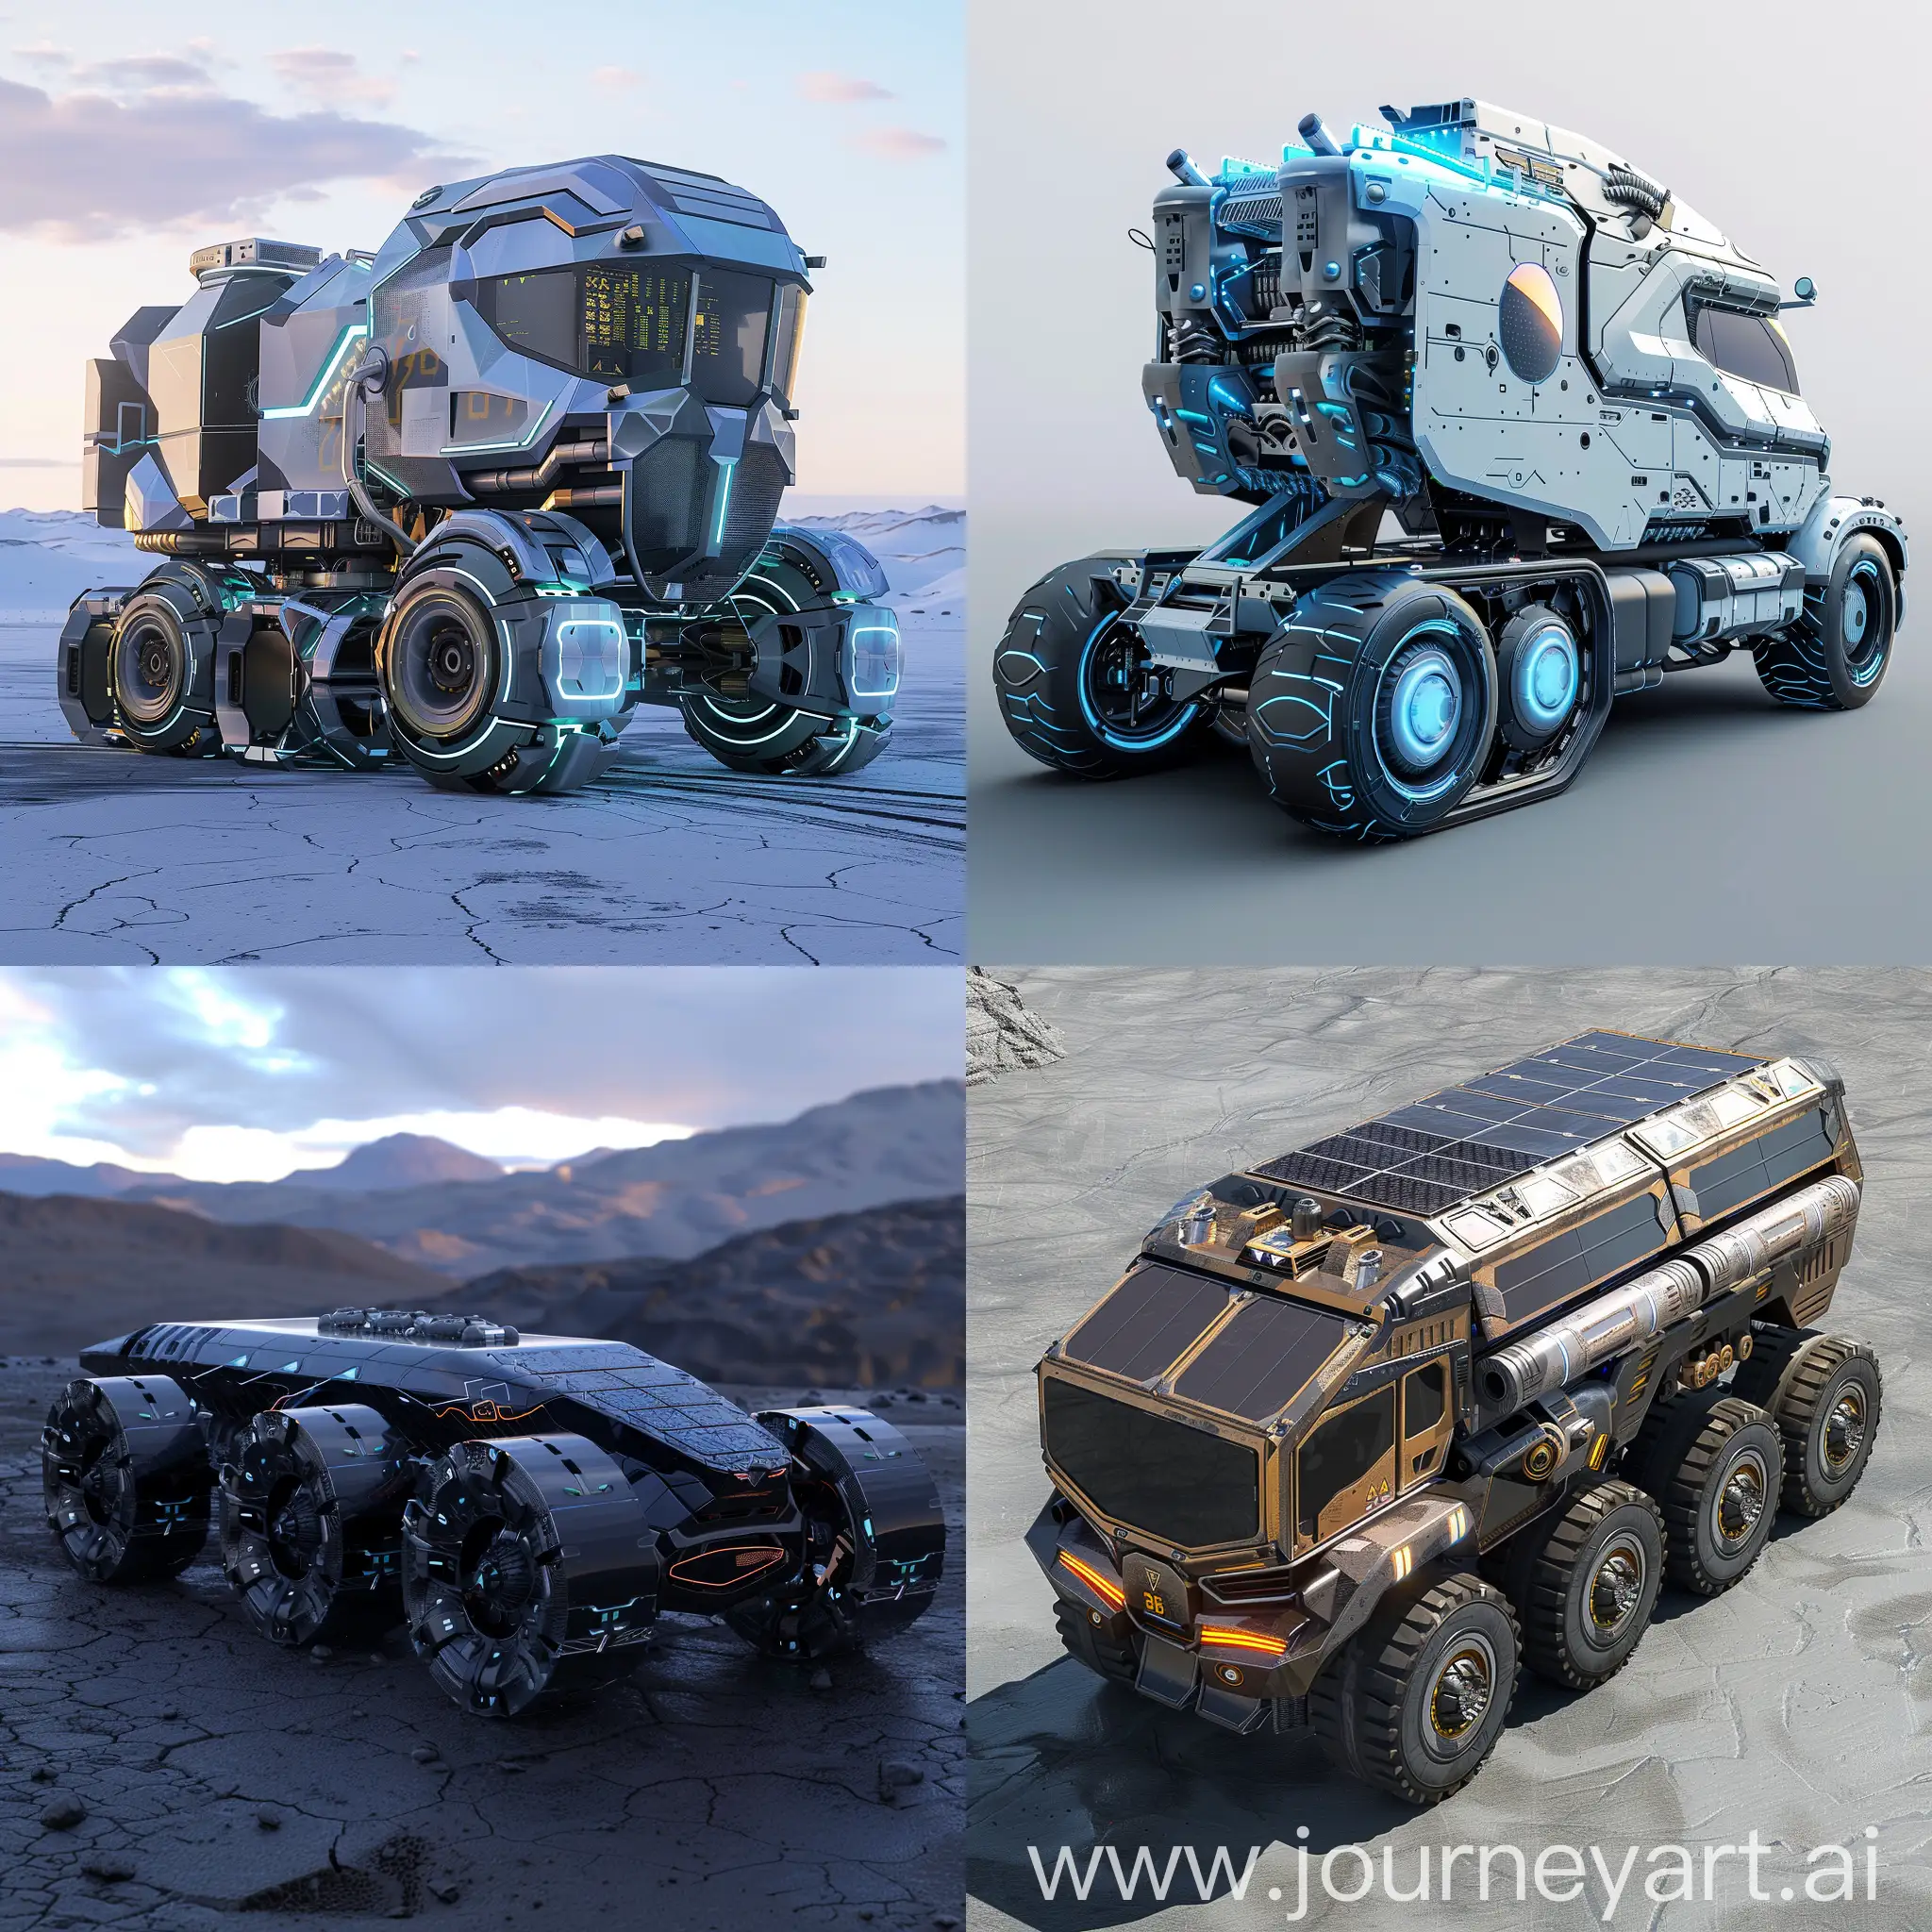 Sci-Fi truck, Advanced Science and Technology, Energy Conversion Engine, Modular Battery Cells, Electro-Magnetic Wheels, AI-Driven Navigation System, Holographic Display Controls, Nano-Material Chassis, Atmospheric Water Generation System, Self-Repairing Components, Integrated Drone Deployment, Quantum Computing Processor, Adaptive Camouflage Skin, Solar Panel Exoskeleton, Aerodynamic Transforming Body, Retractable Aerofoils, 360-Degree Sensor Array, Climate Adaptation Systems, Expandable Cargo Hold, Electro-Reflective Windows, Integrated Rescue Drones, Communication Beacon Tower, In Unreal Engine 5 Style --stylize 1000